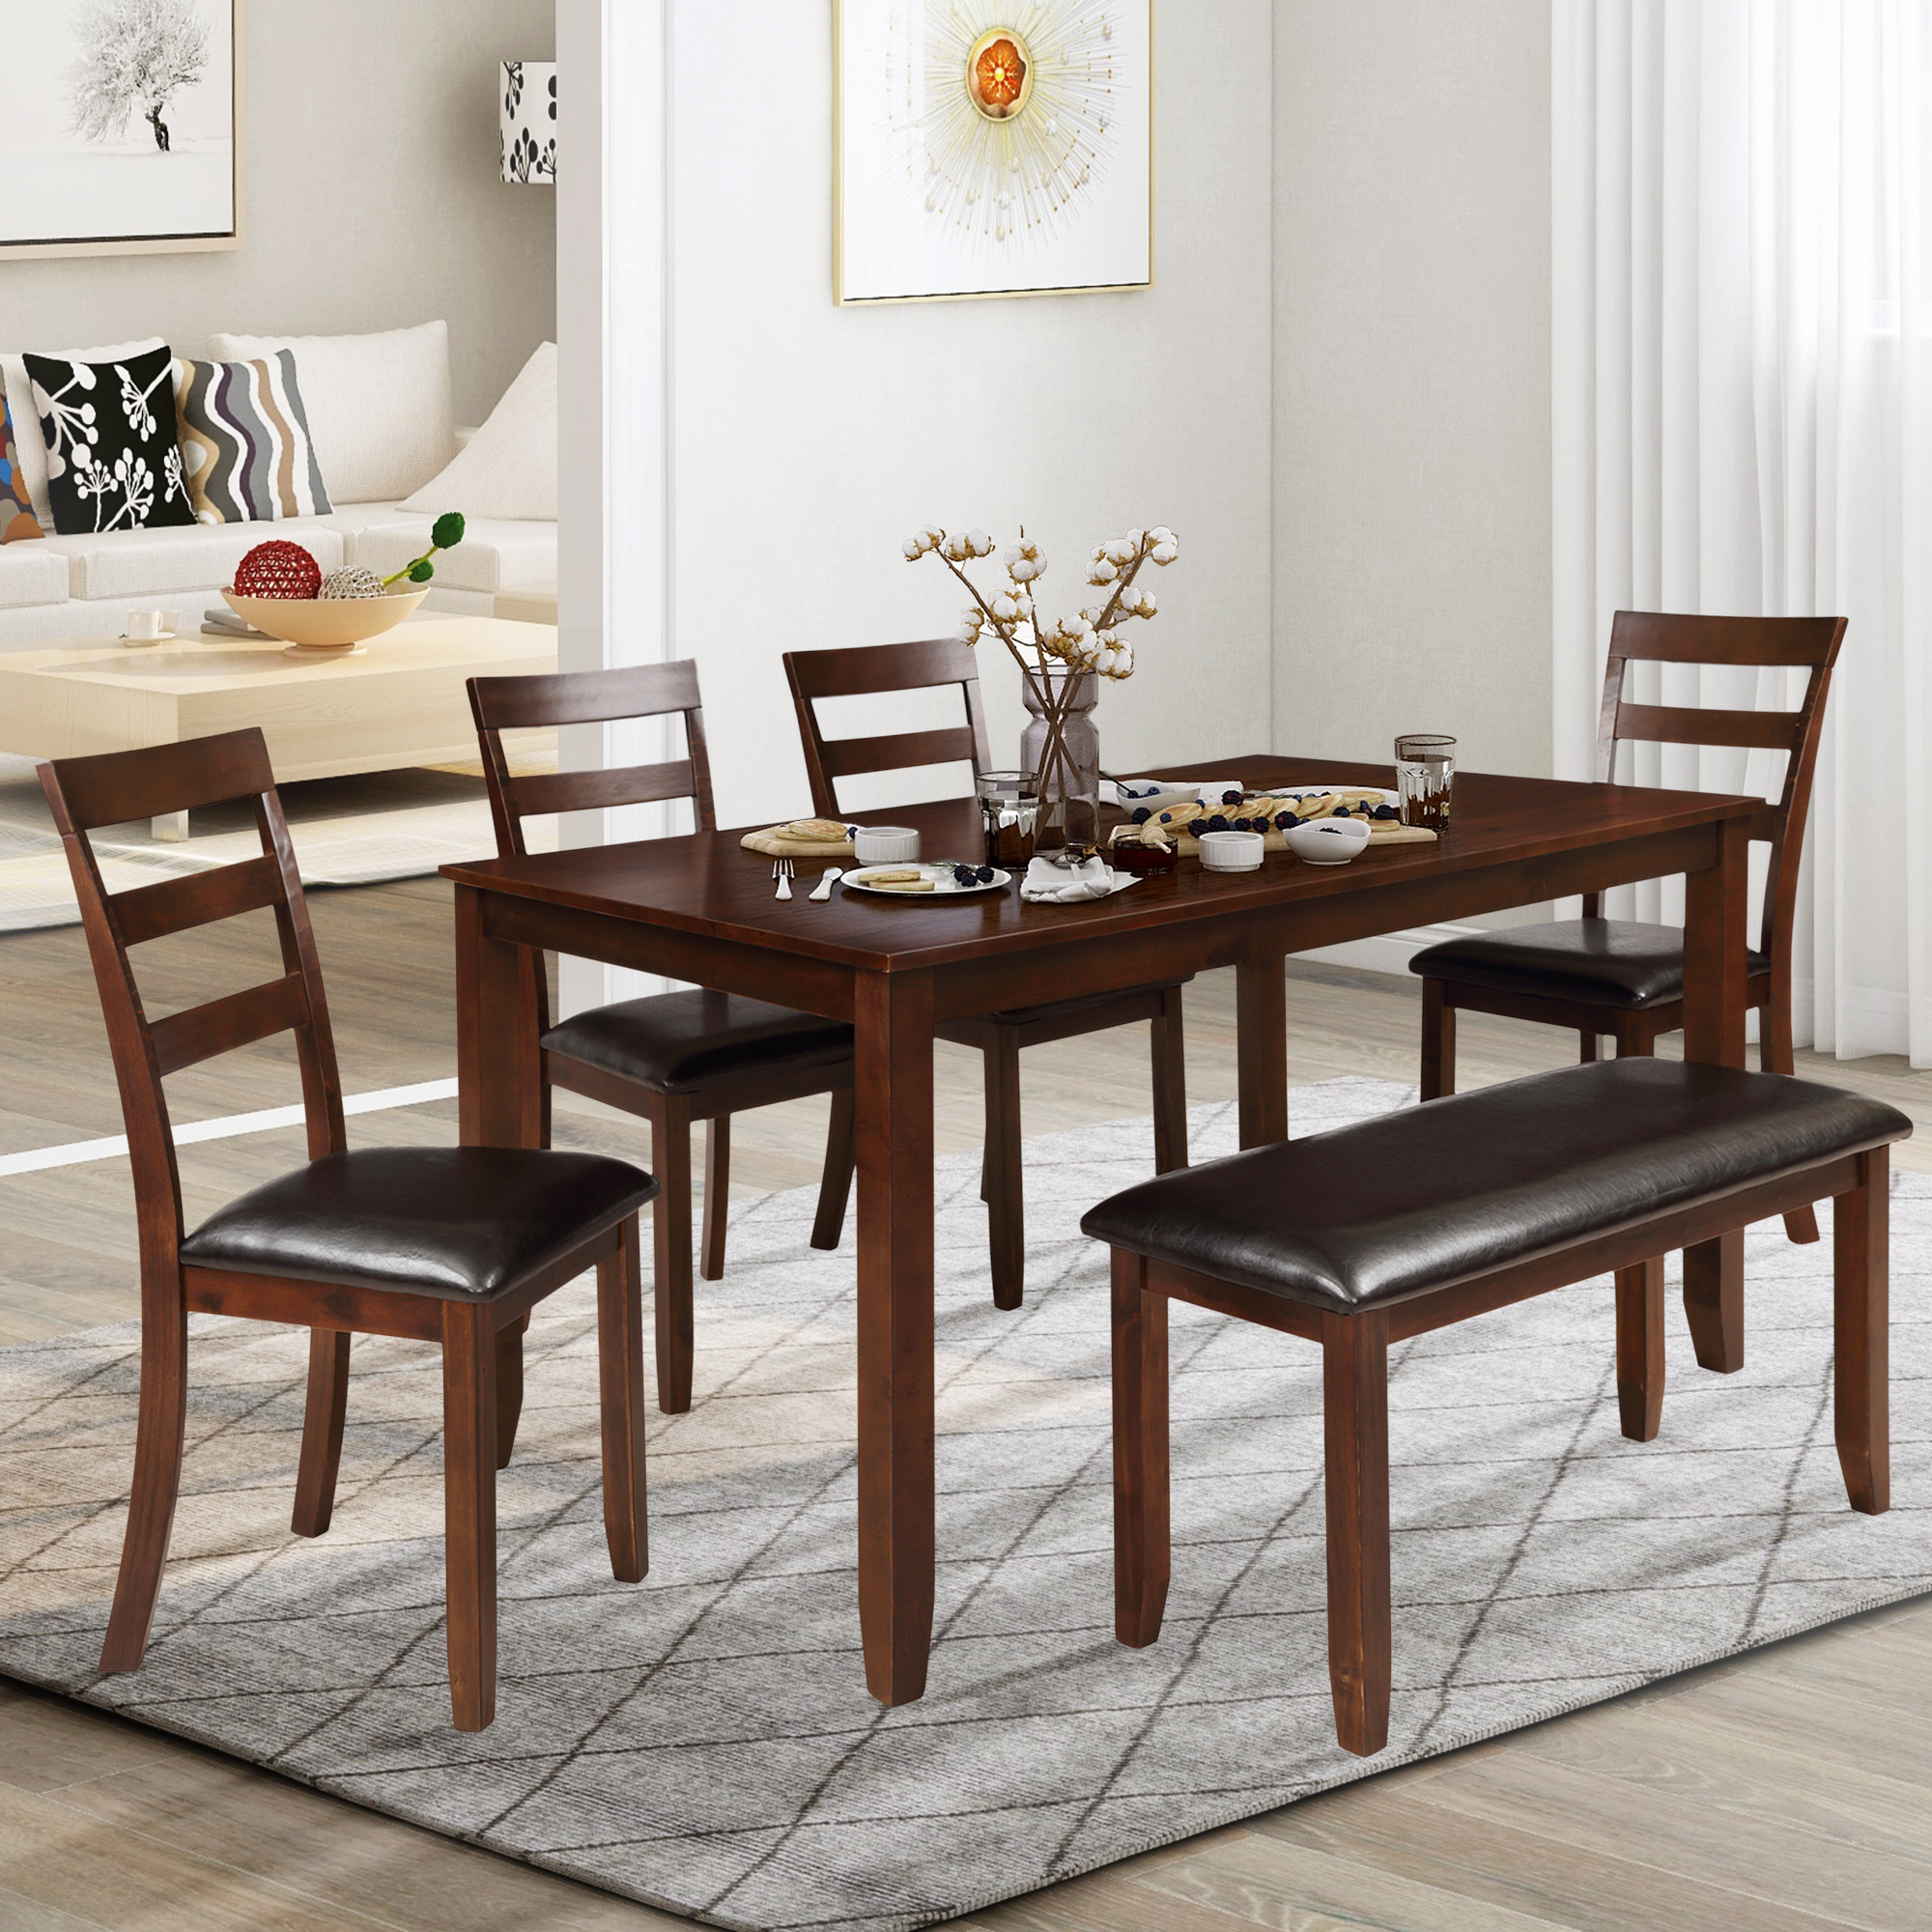 EUROCO 6-Piece Dining Room Table Set with 4 Ladder Chairs and Bench, Brown - image 2 of 7